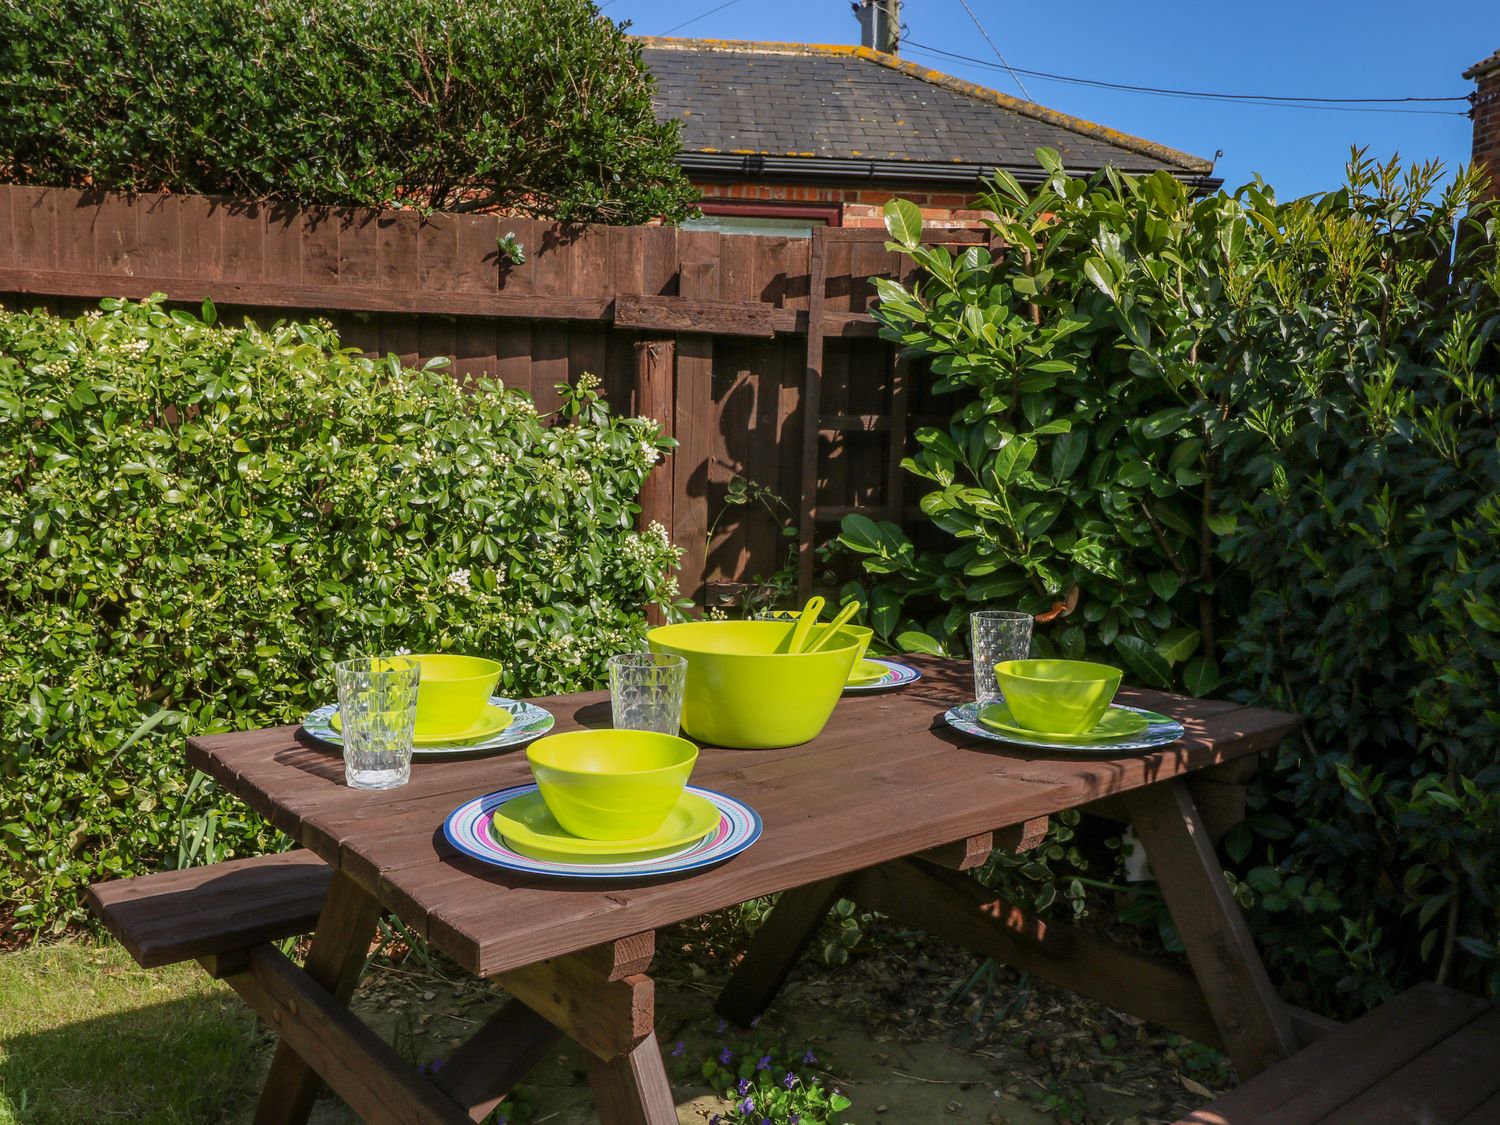 1 Pines Farm Cottages, North York Moors and Coast